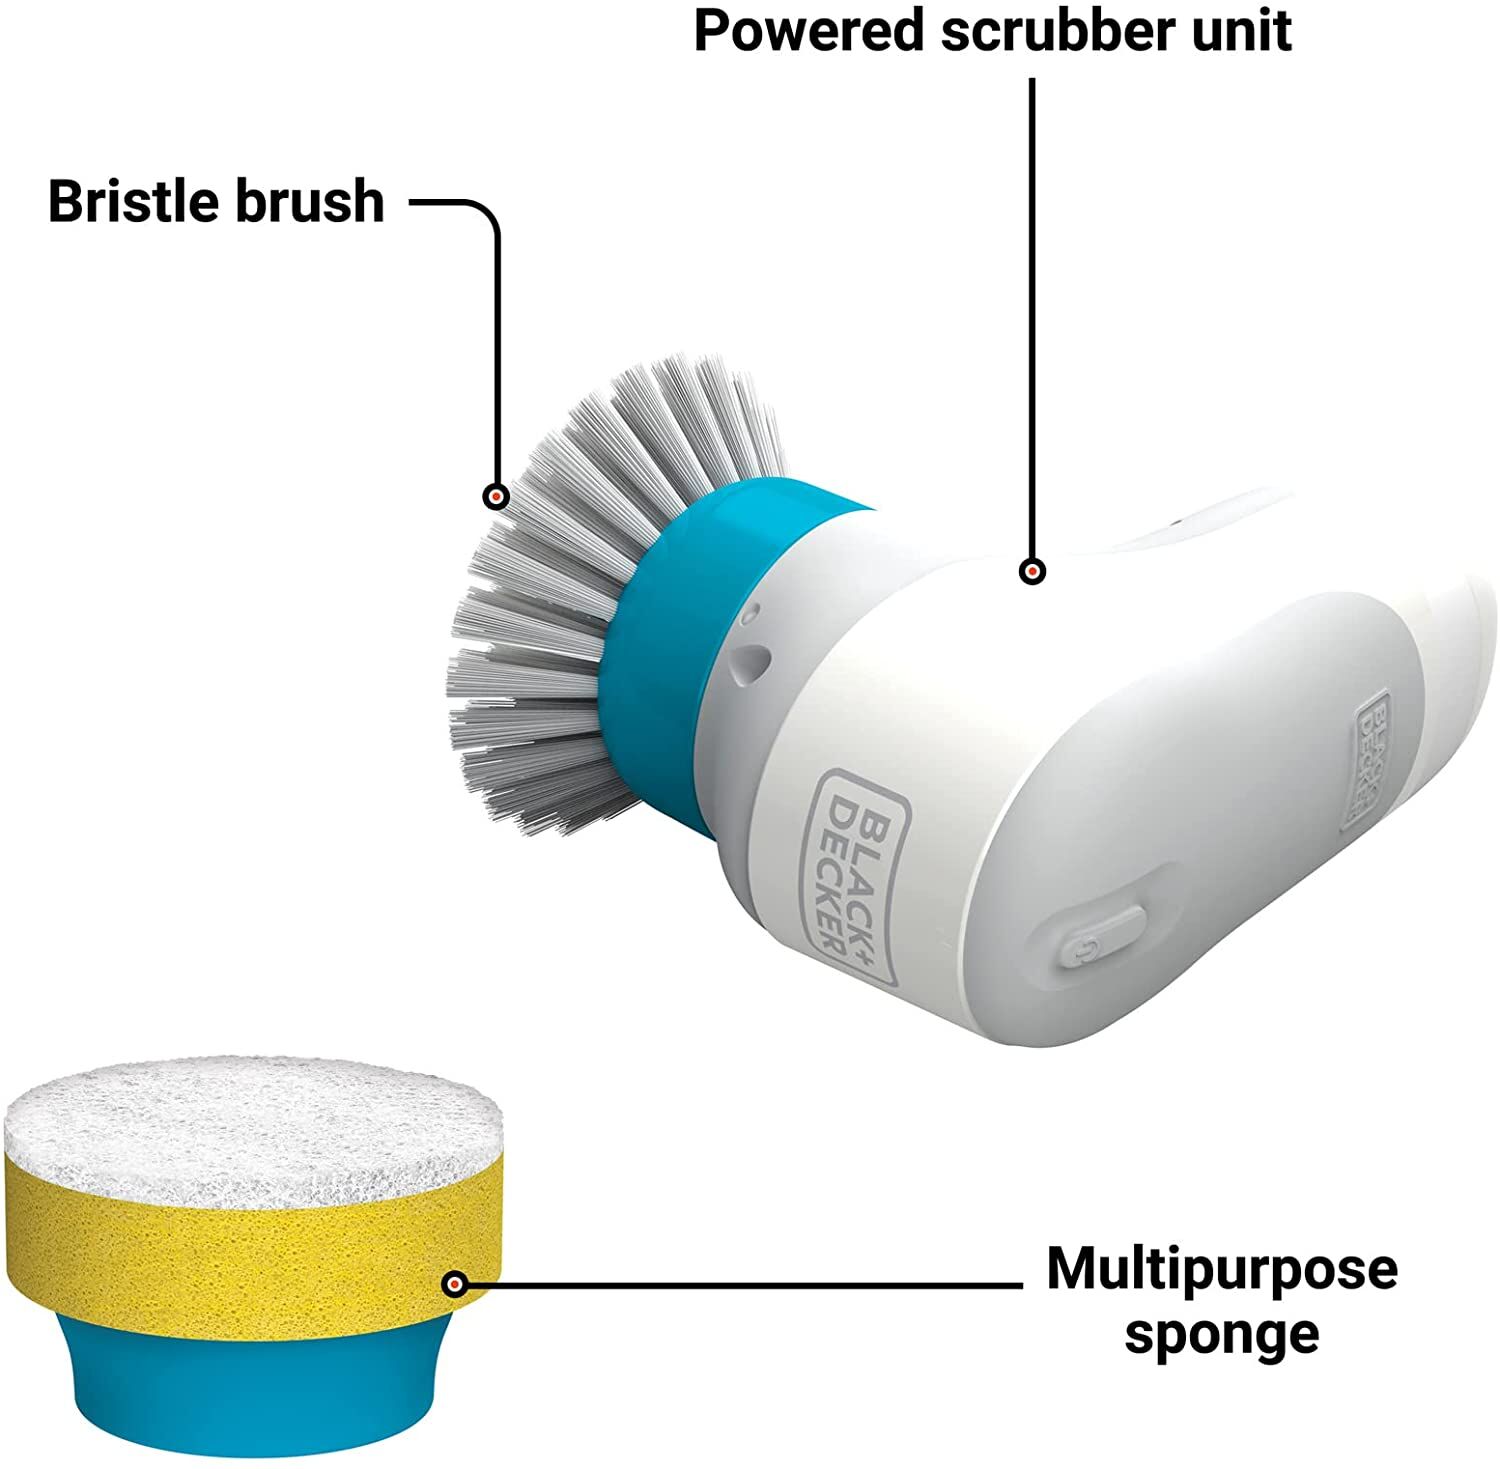 product walkaround of Black and Decker Grimebuster powered scrubber kit.